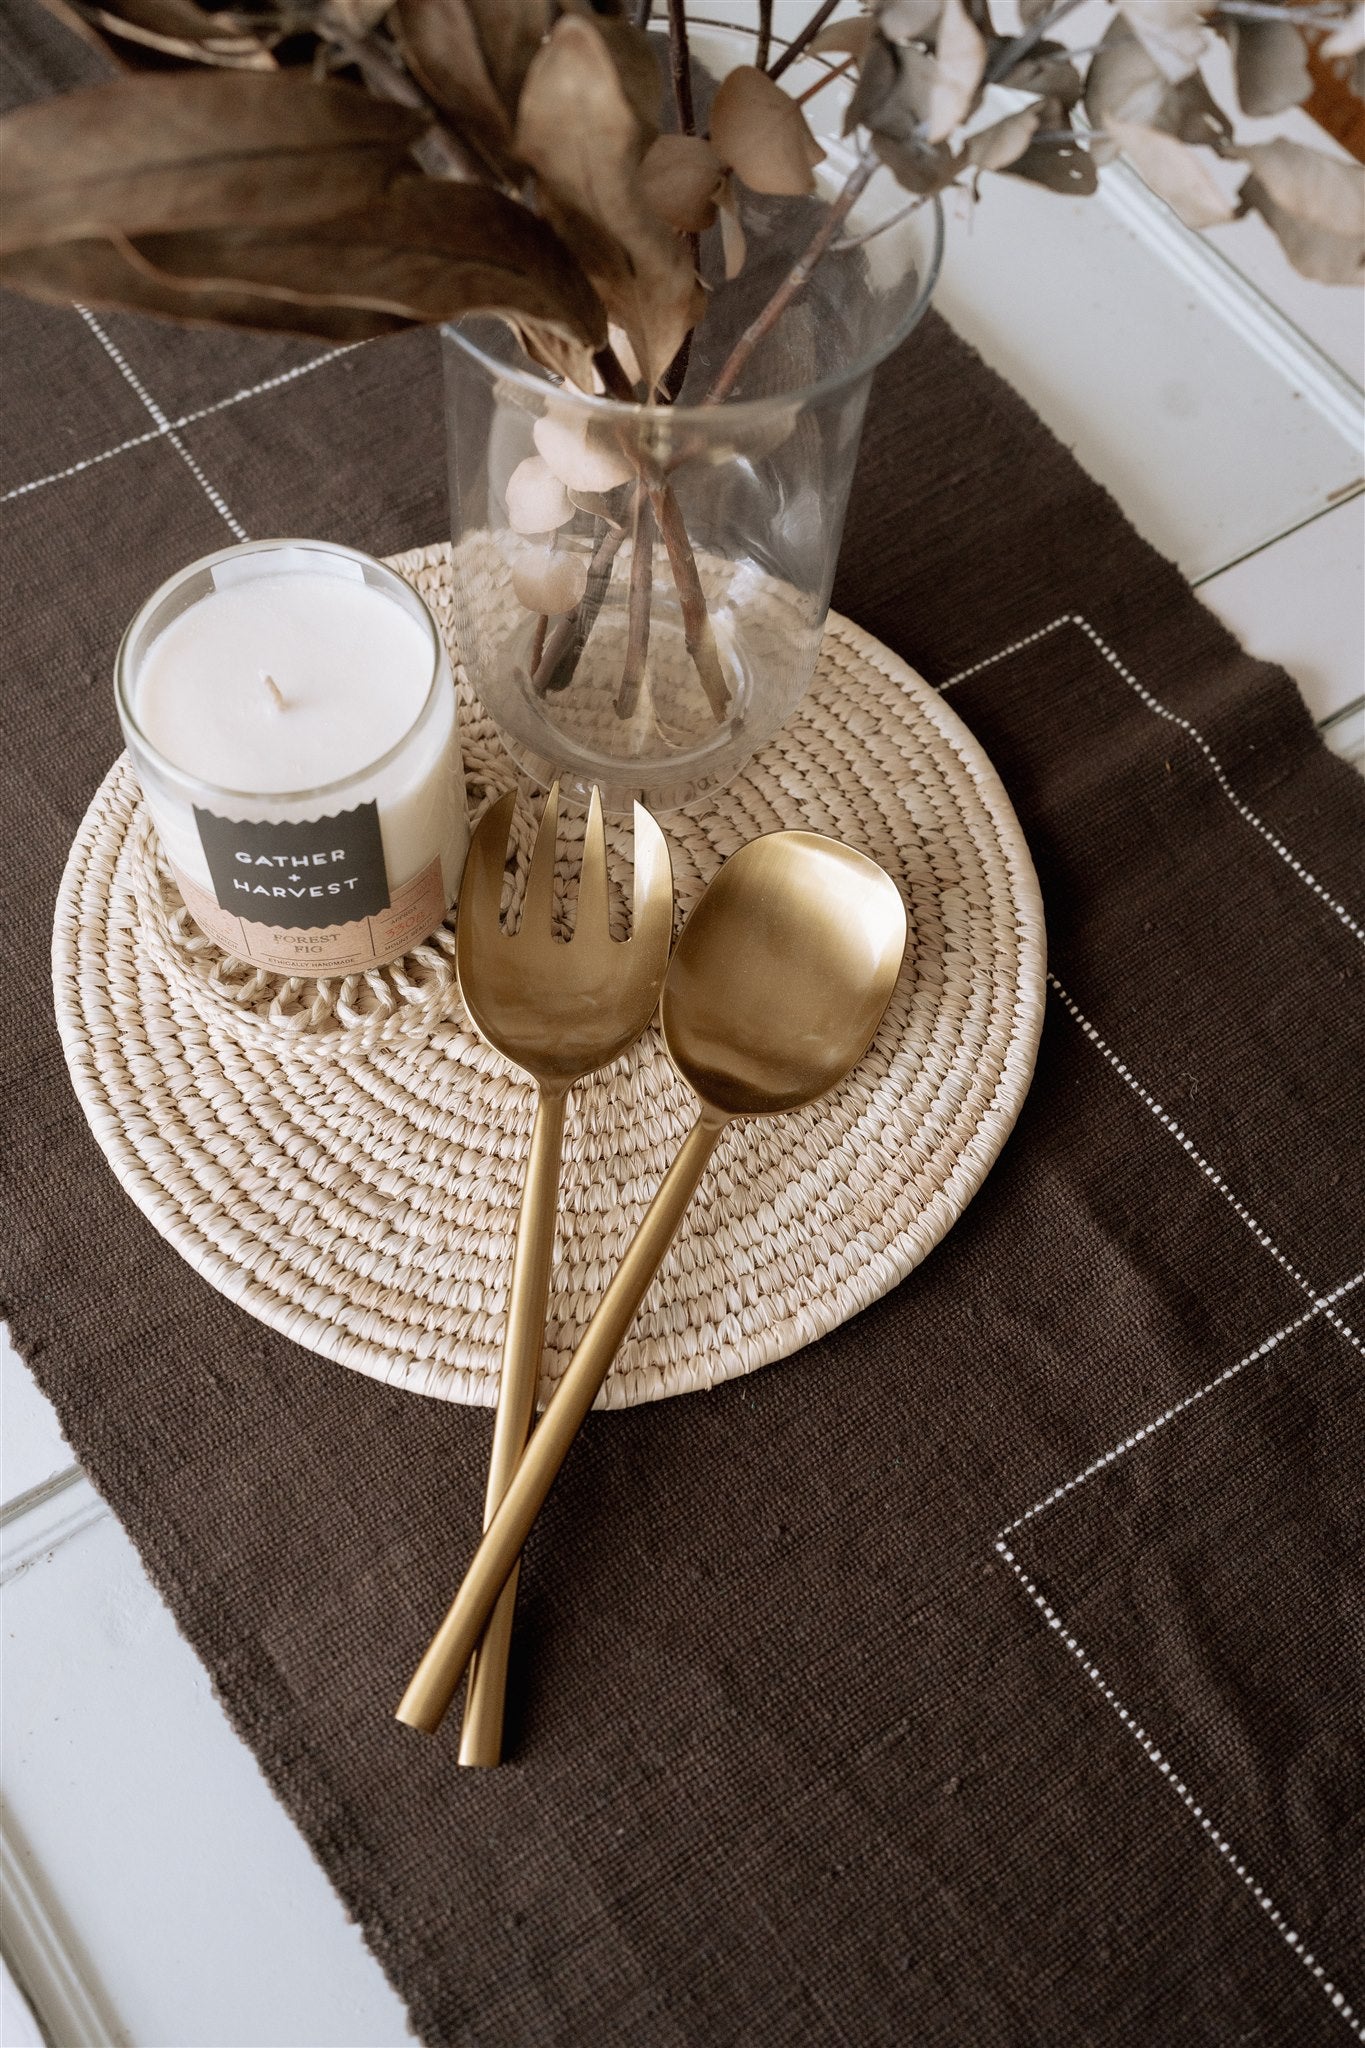 Gather and Harvest CocoSoy Candles